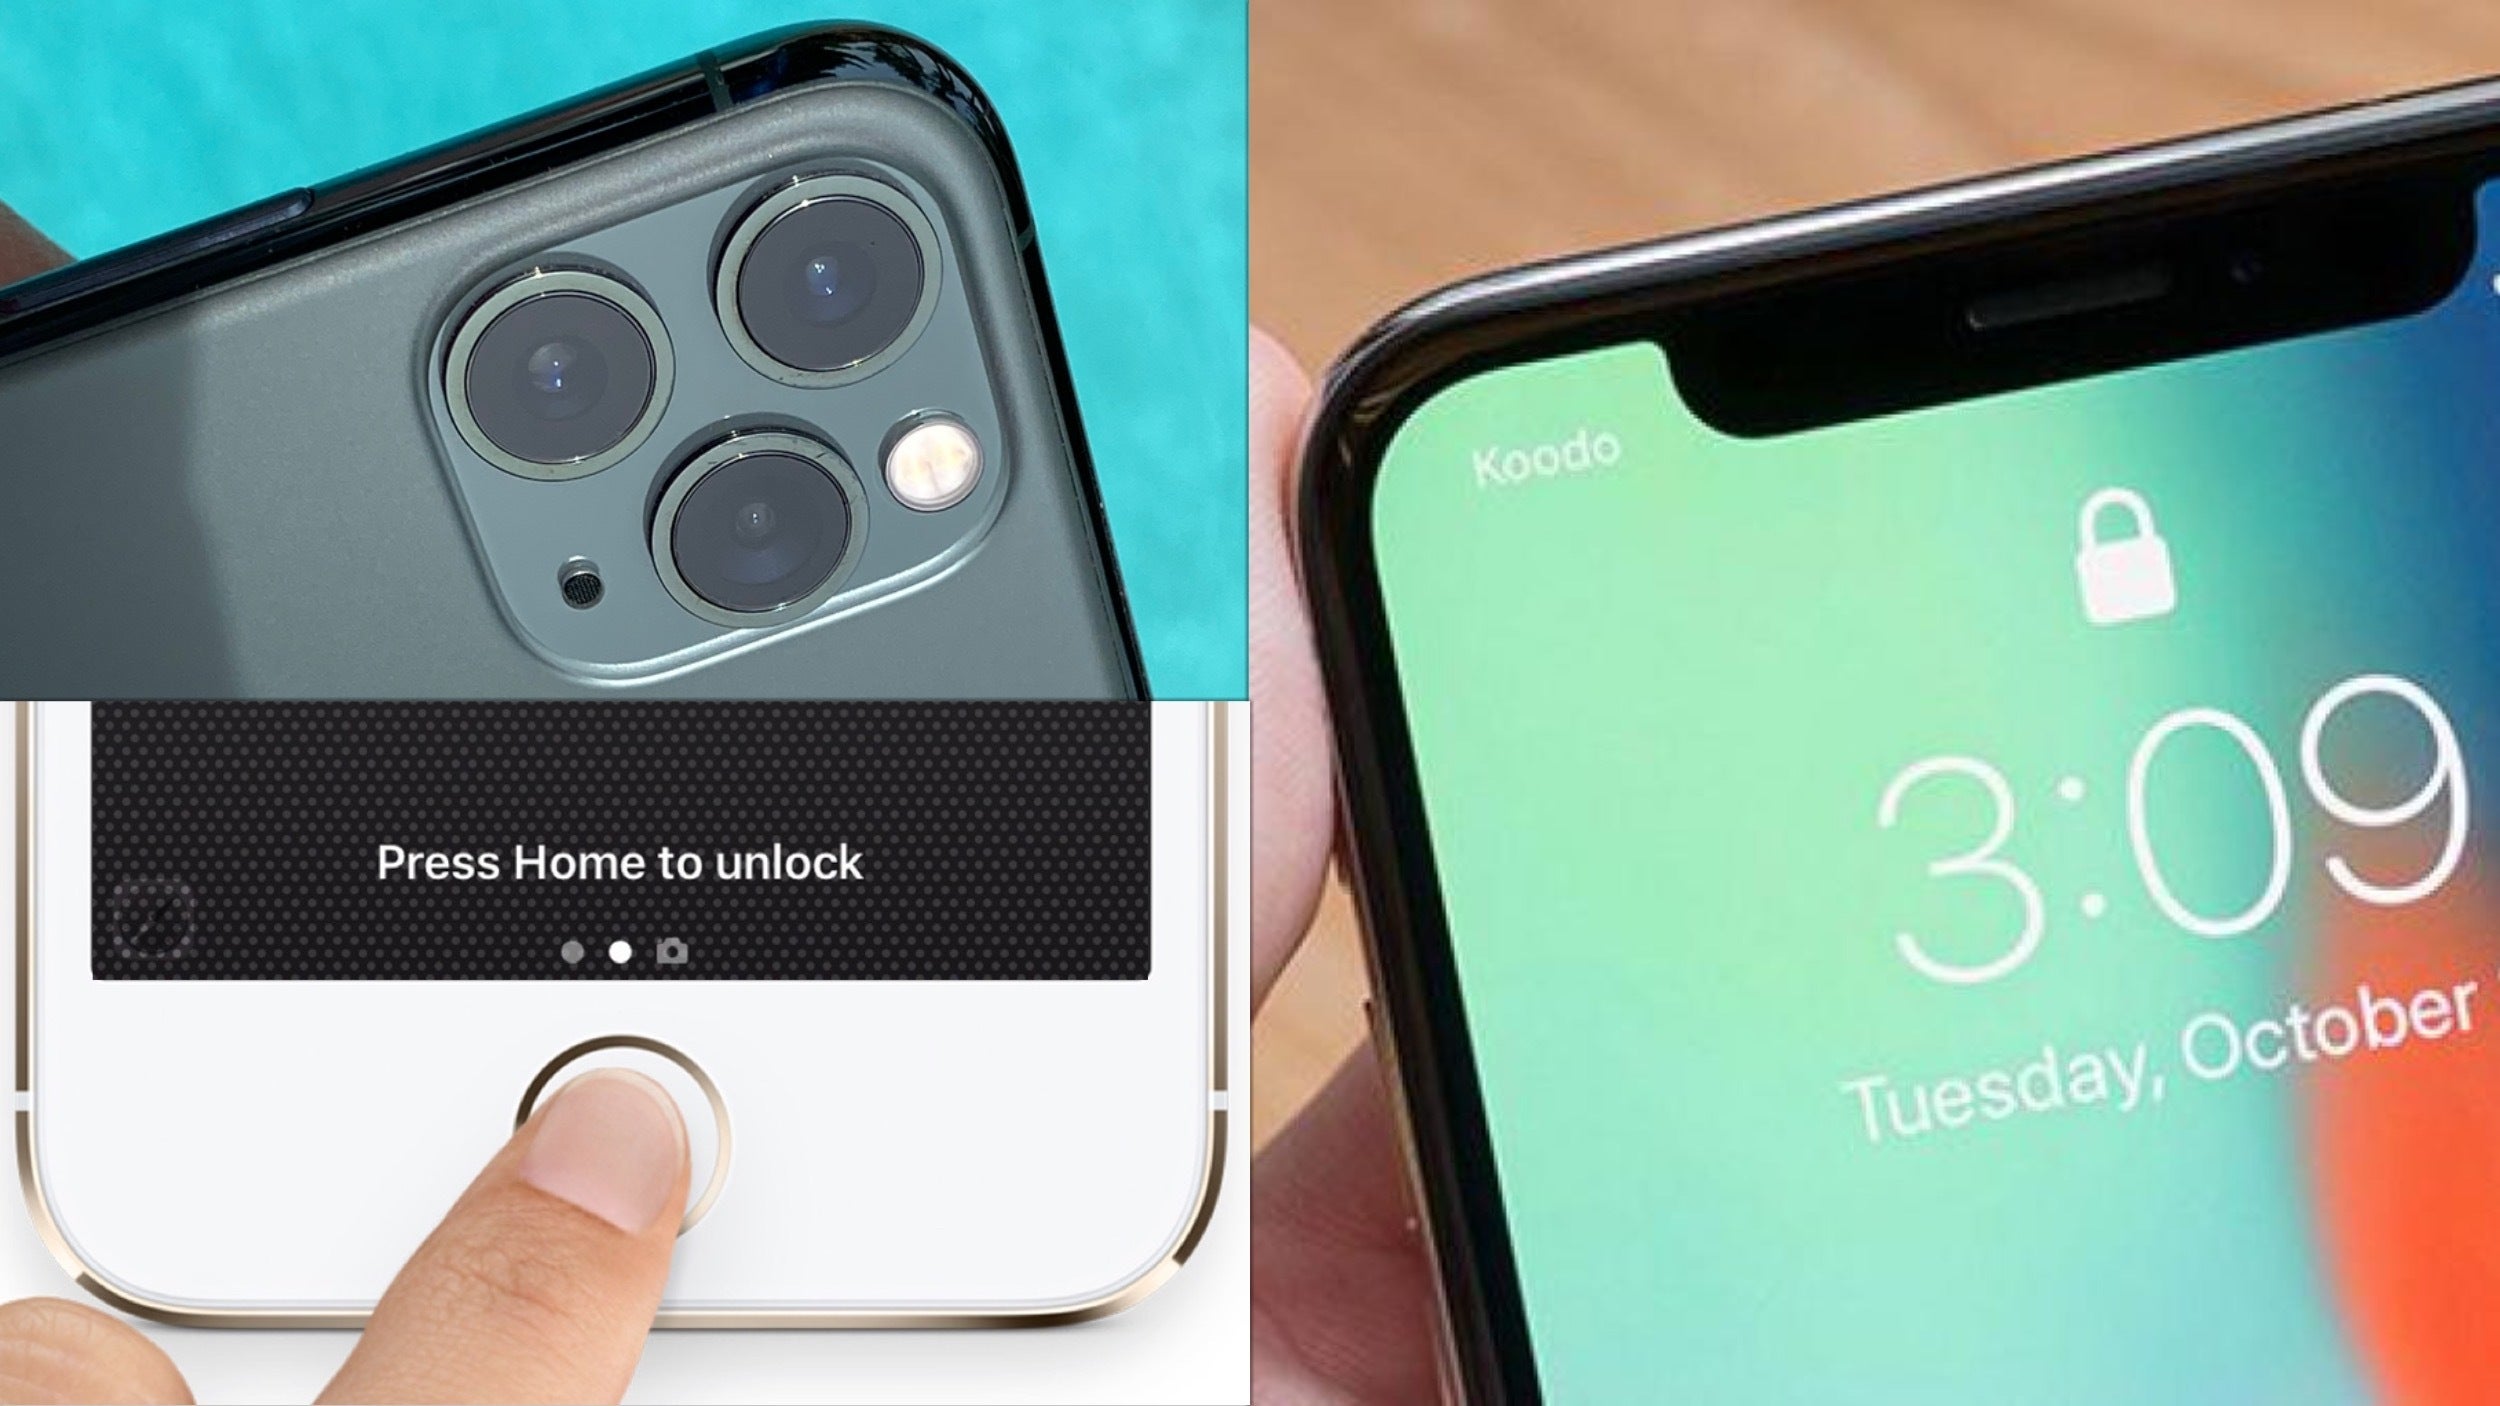 iPhone 14 Pro weird notch replacement to teach Android an Apple lesson on design